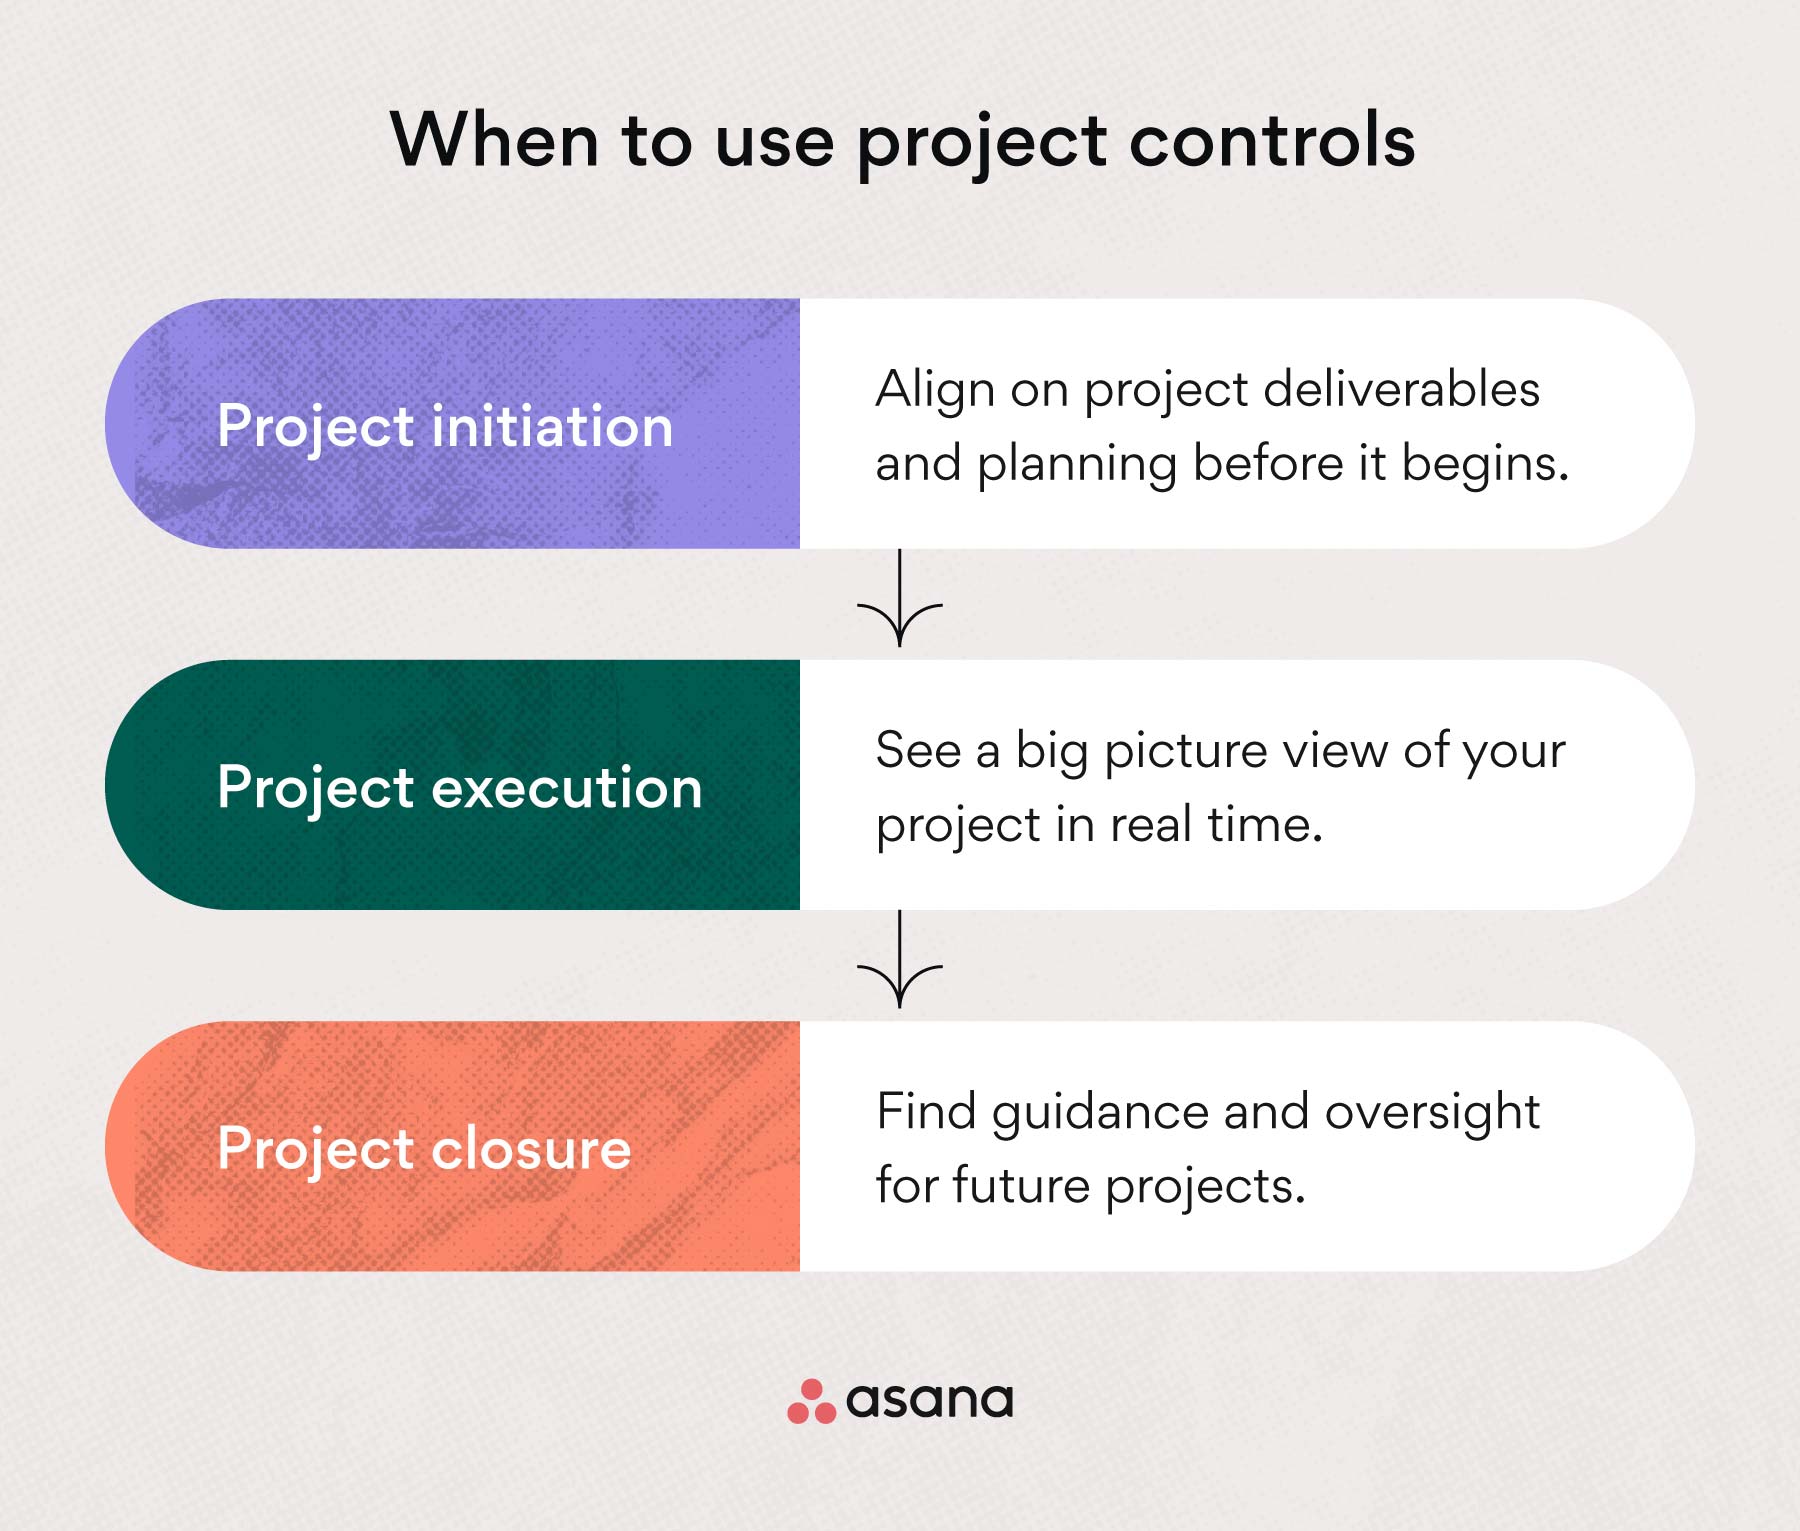 Where to implement project controls